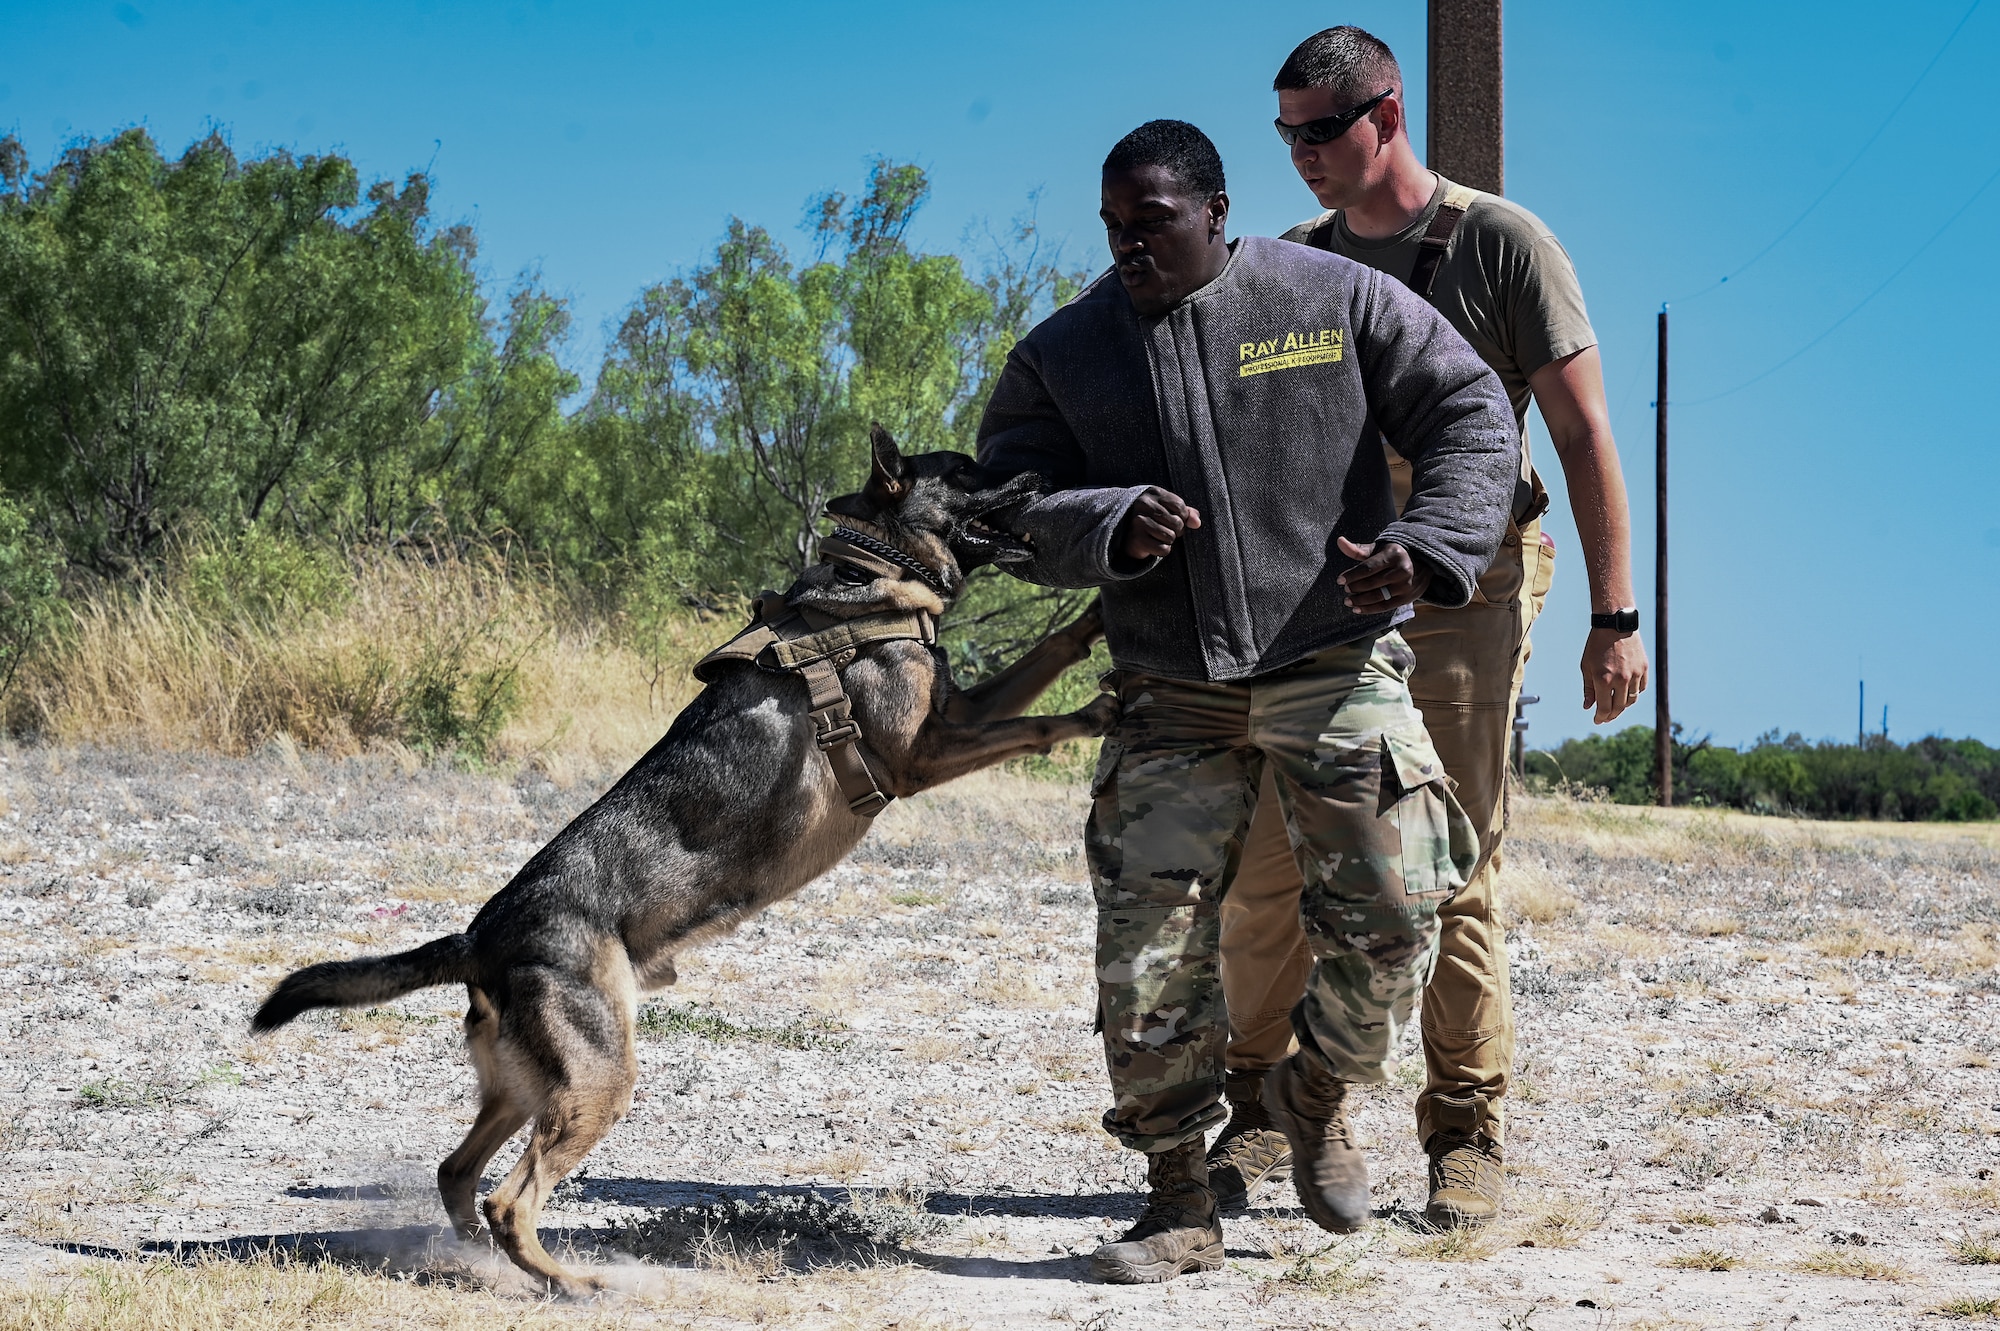 U.S. Air Force Airmen from the 47th Security Forces Squadron simulate K-9 protection capabilities during a base tour with the U.S. Border Patrol Del Rio Sector leadership and the Val Verde County Sheriff's Department at Laughlin Air Force Base, Texas, Aug. 4, 2023. The K-9 demonstration showcased the capabilities and preparedness of Laughlin’s Defenders. (U.S. Air Force photo by Airman 1st Class Keira Rossman)